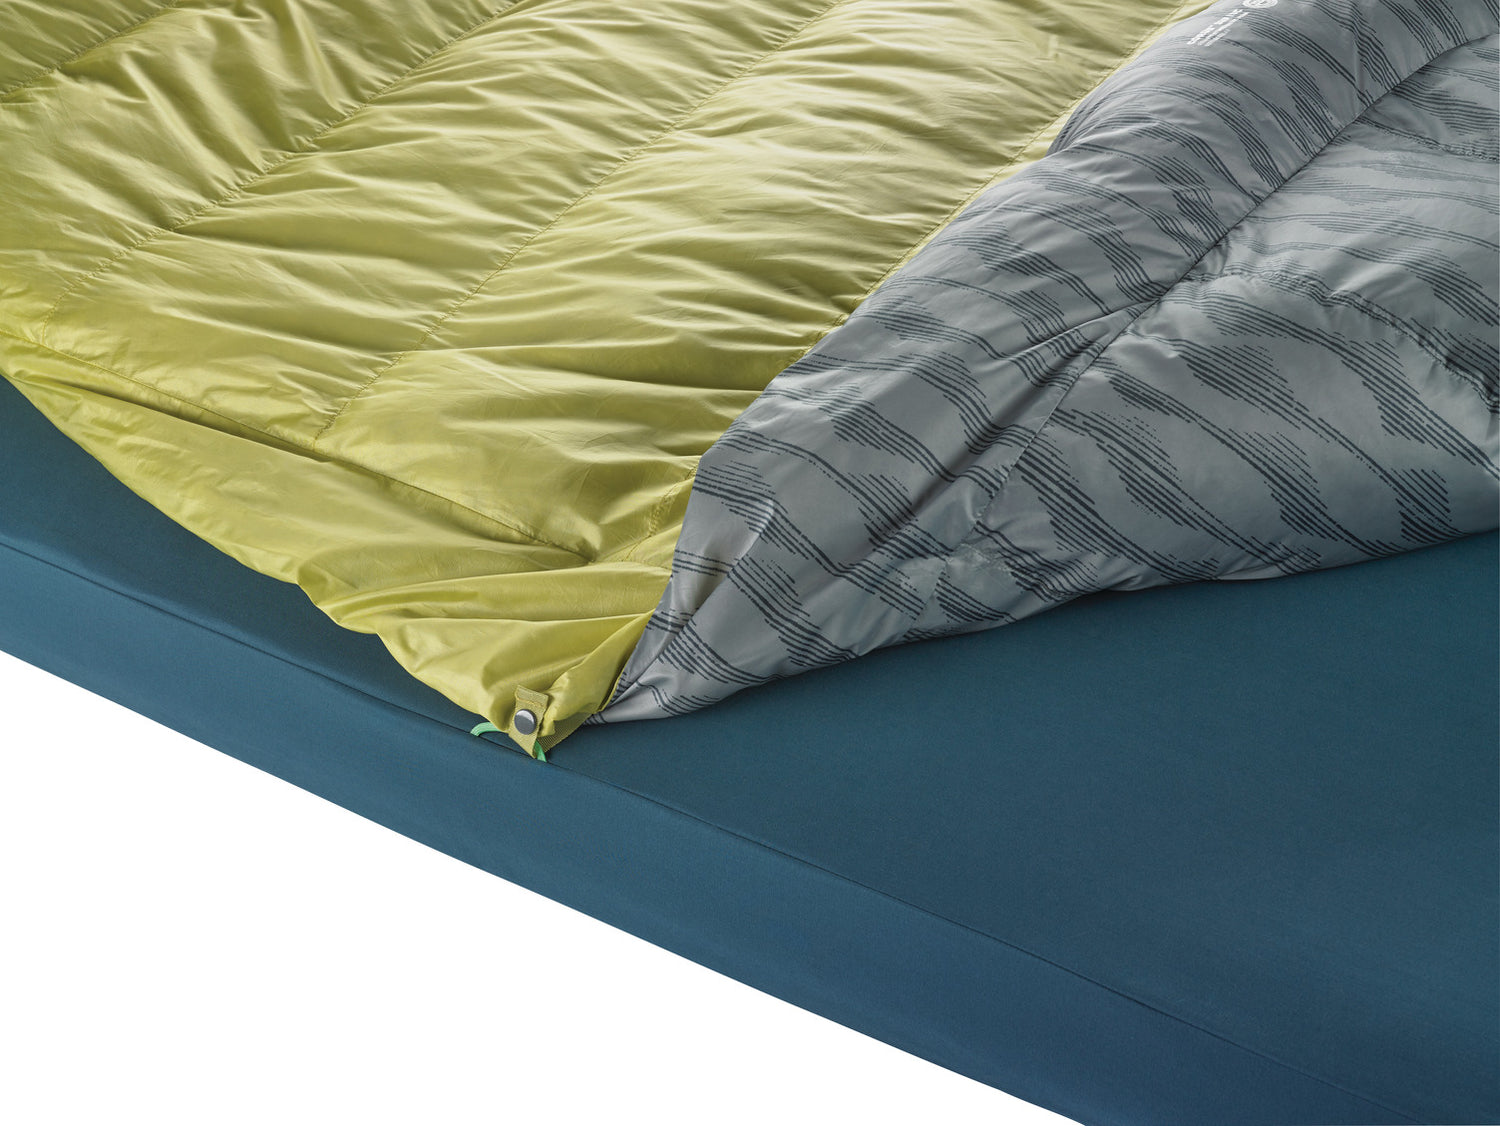 Thermarest Synergy Luxe Sheet 30